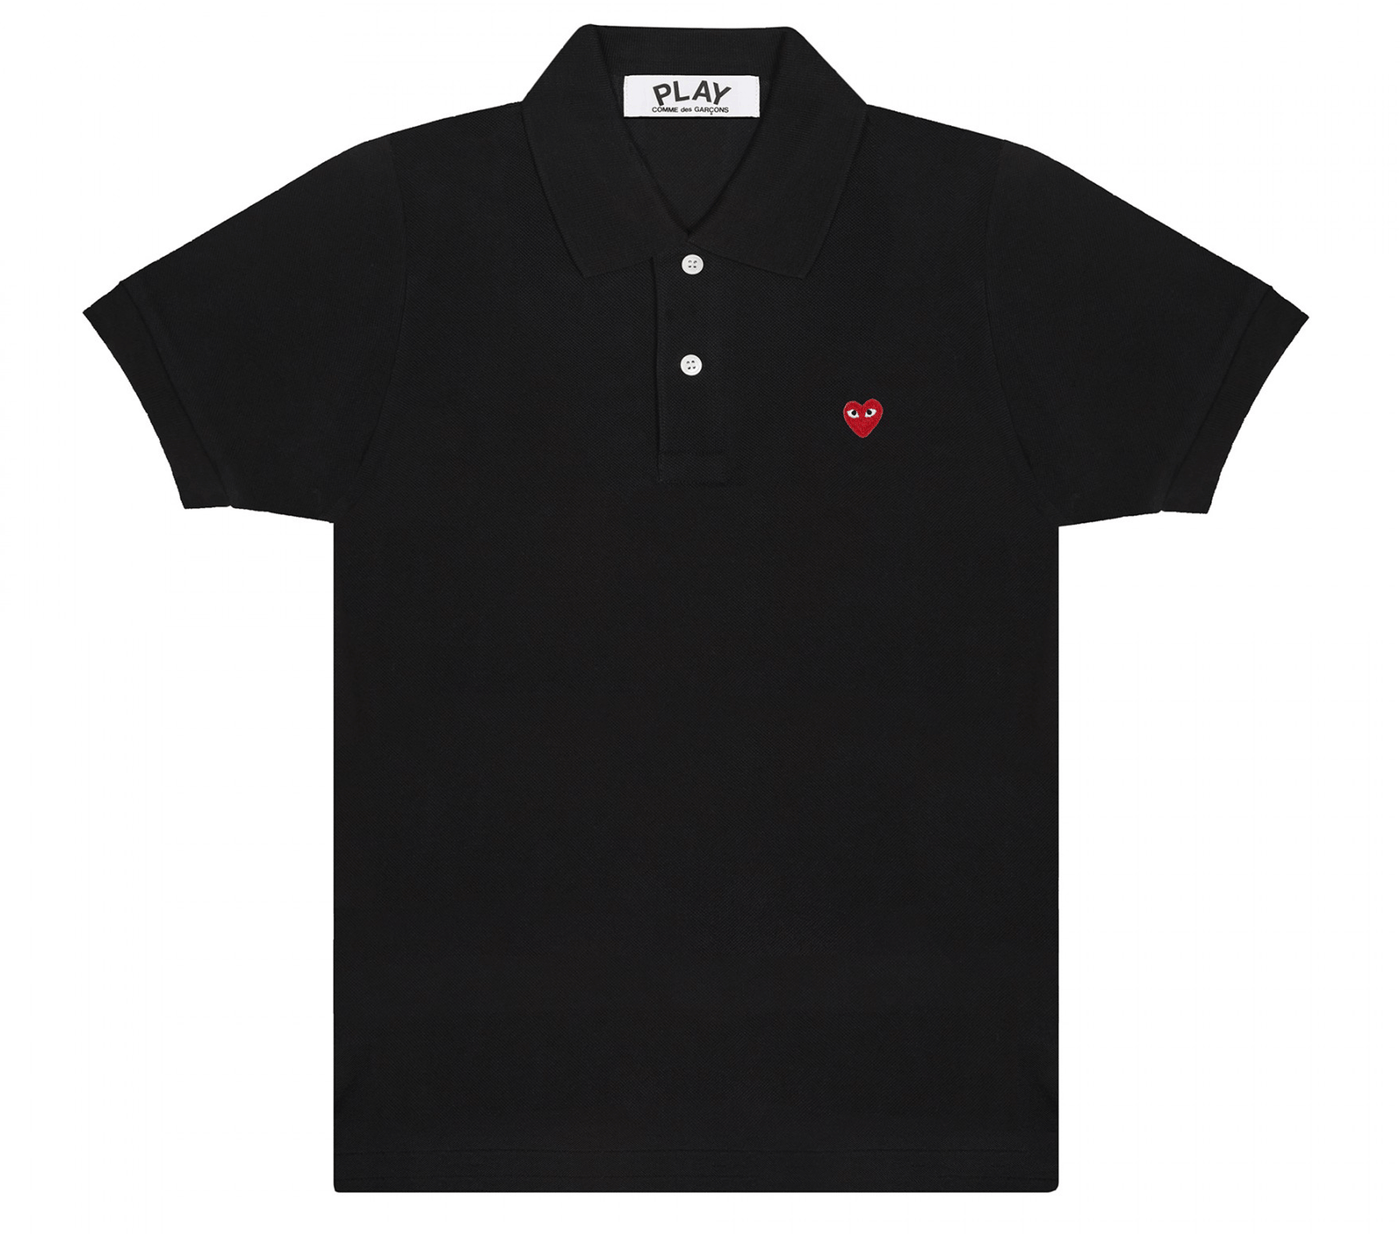 Comme-des-Garcons-Play-Polo-Shirt-with-Little-Red-Emblem-Women-Black-1